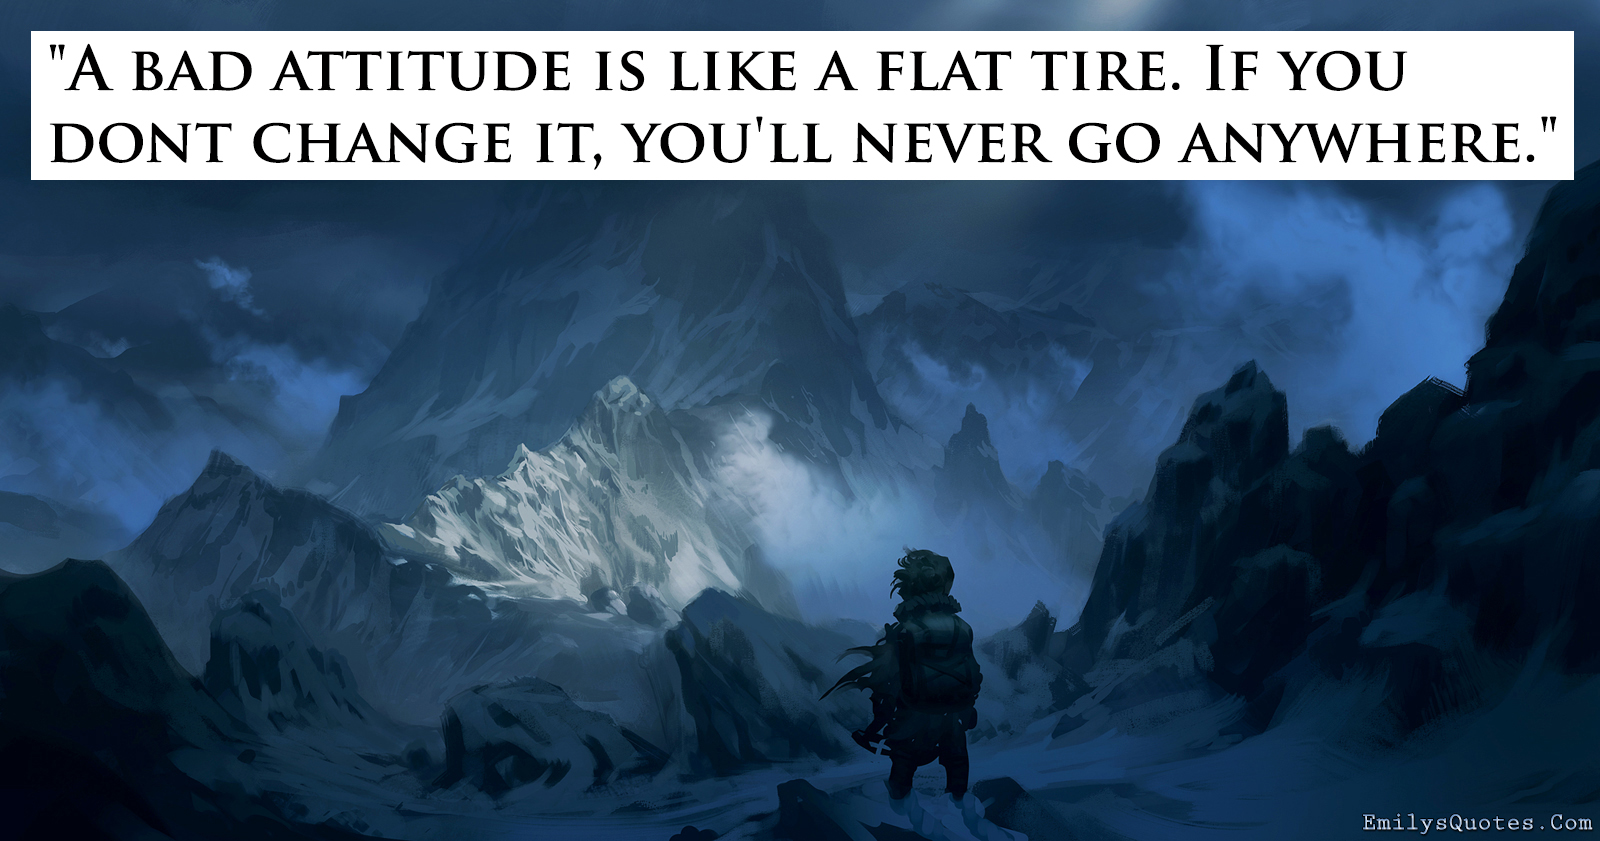 A bad attitude is like a flat tire. If you don’t change it, you’ll never go anywhere